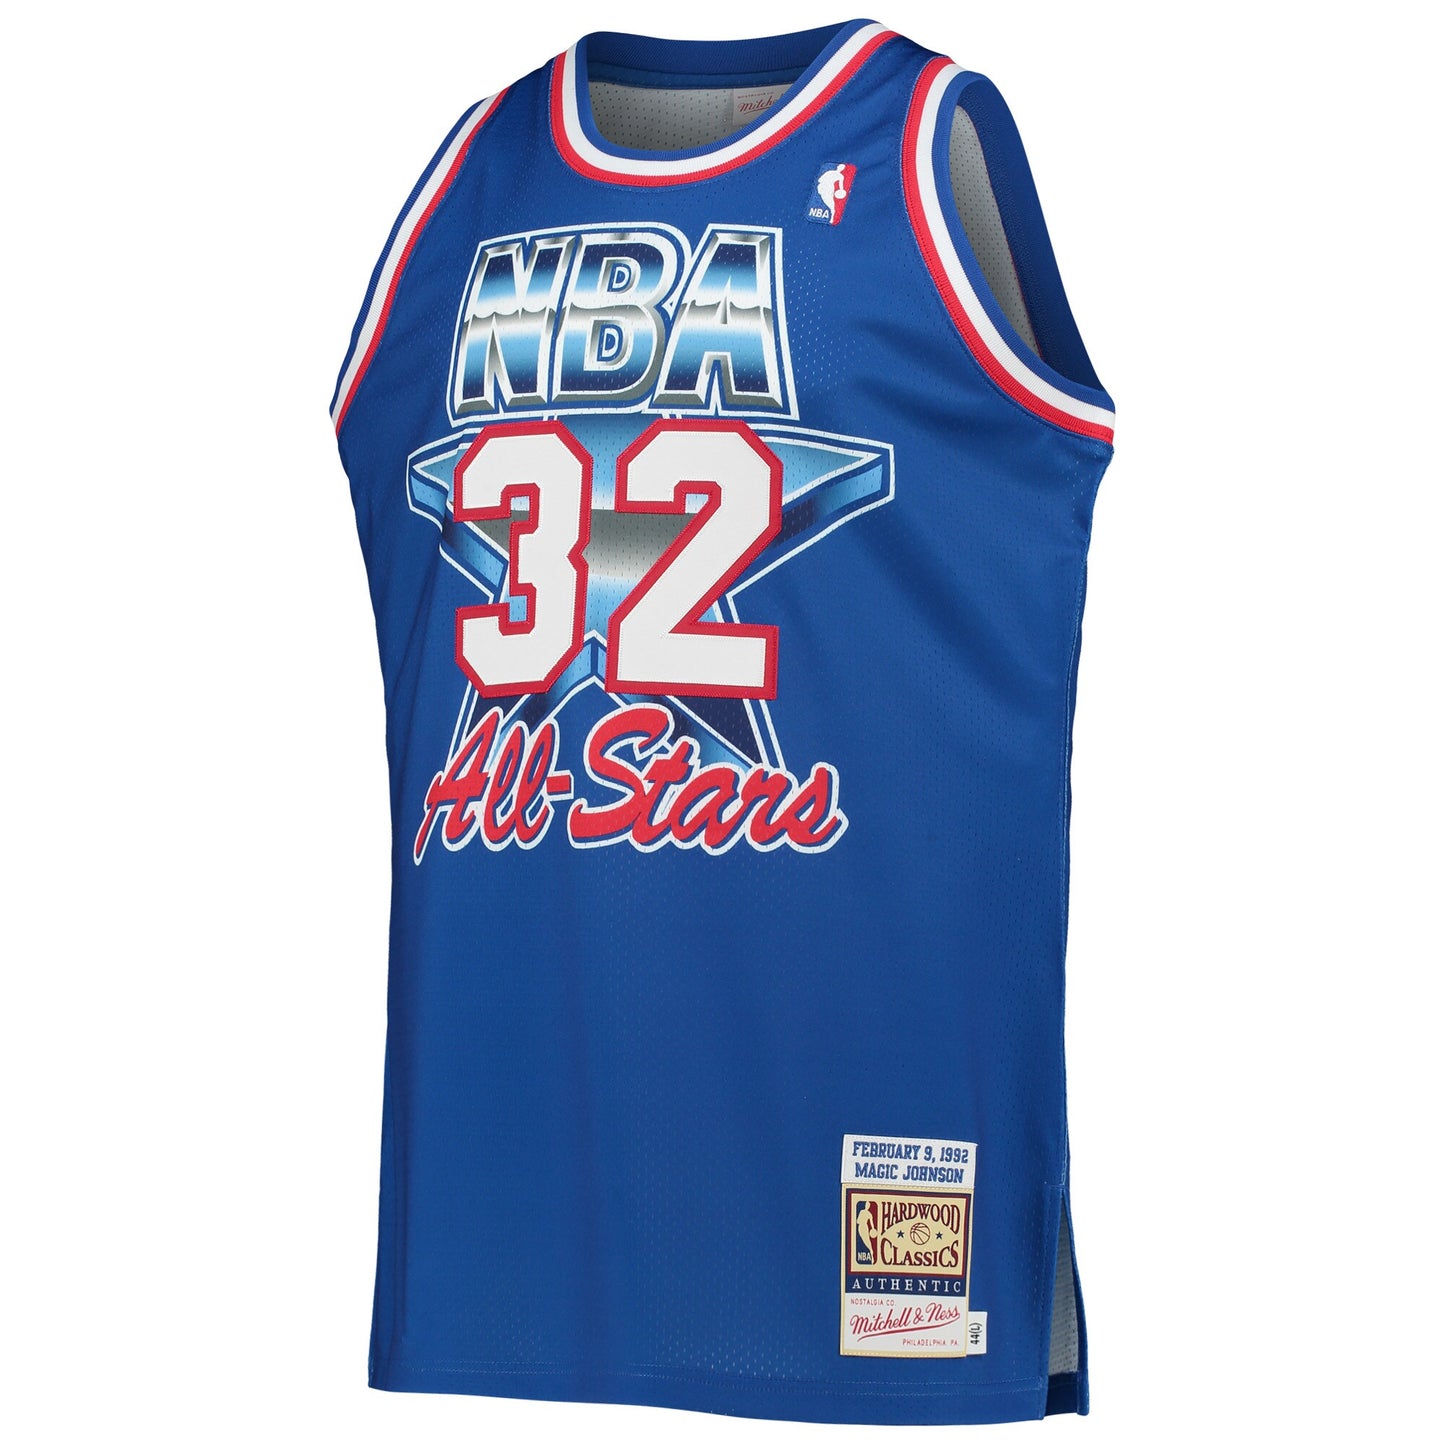 Magic Johnson Western Conference Mitchell & Ness Hardwood Classics 1992 NBA All-Star Game Authentic Jersey - Royal